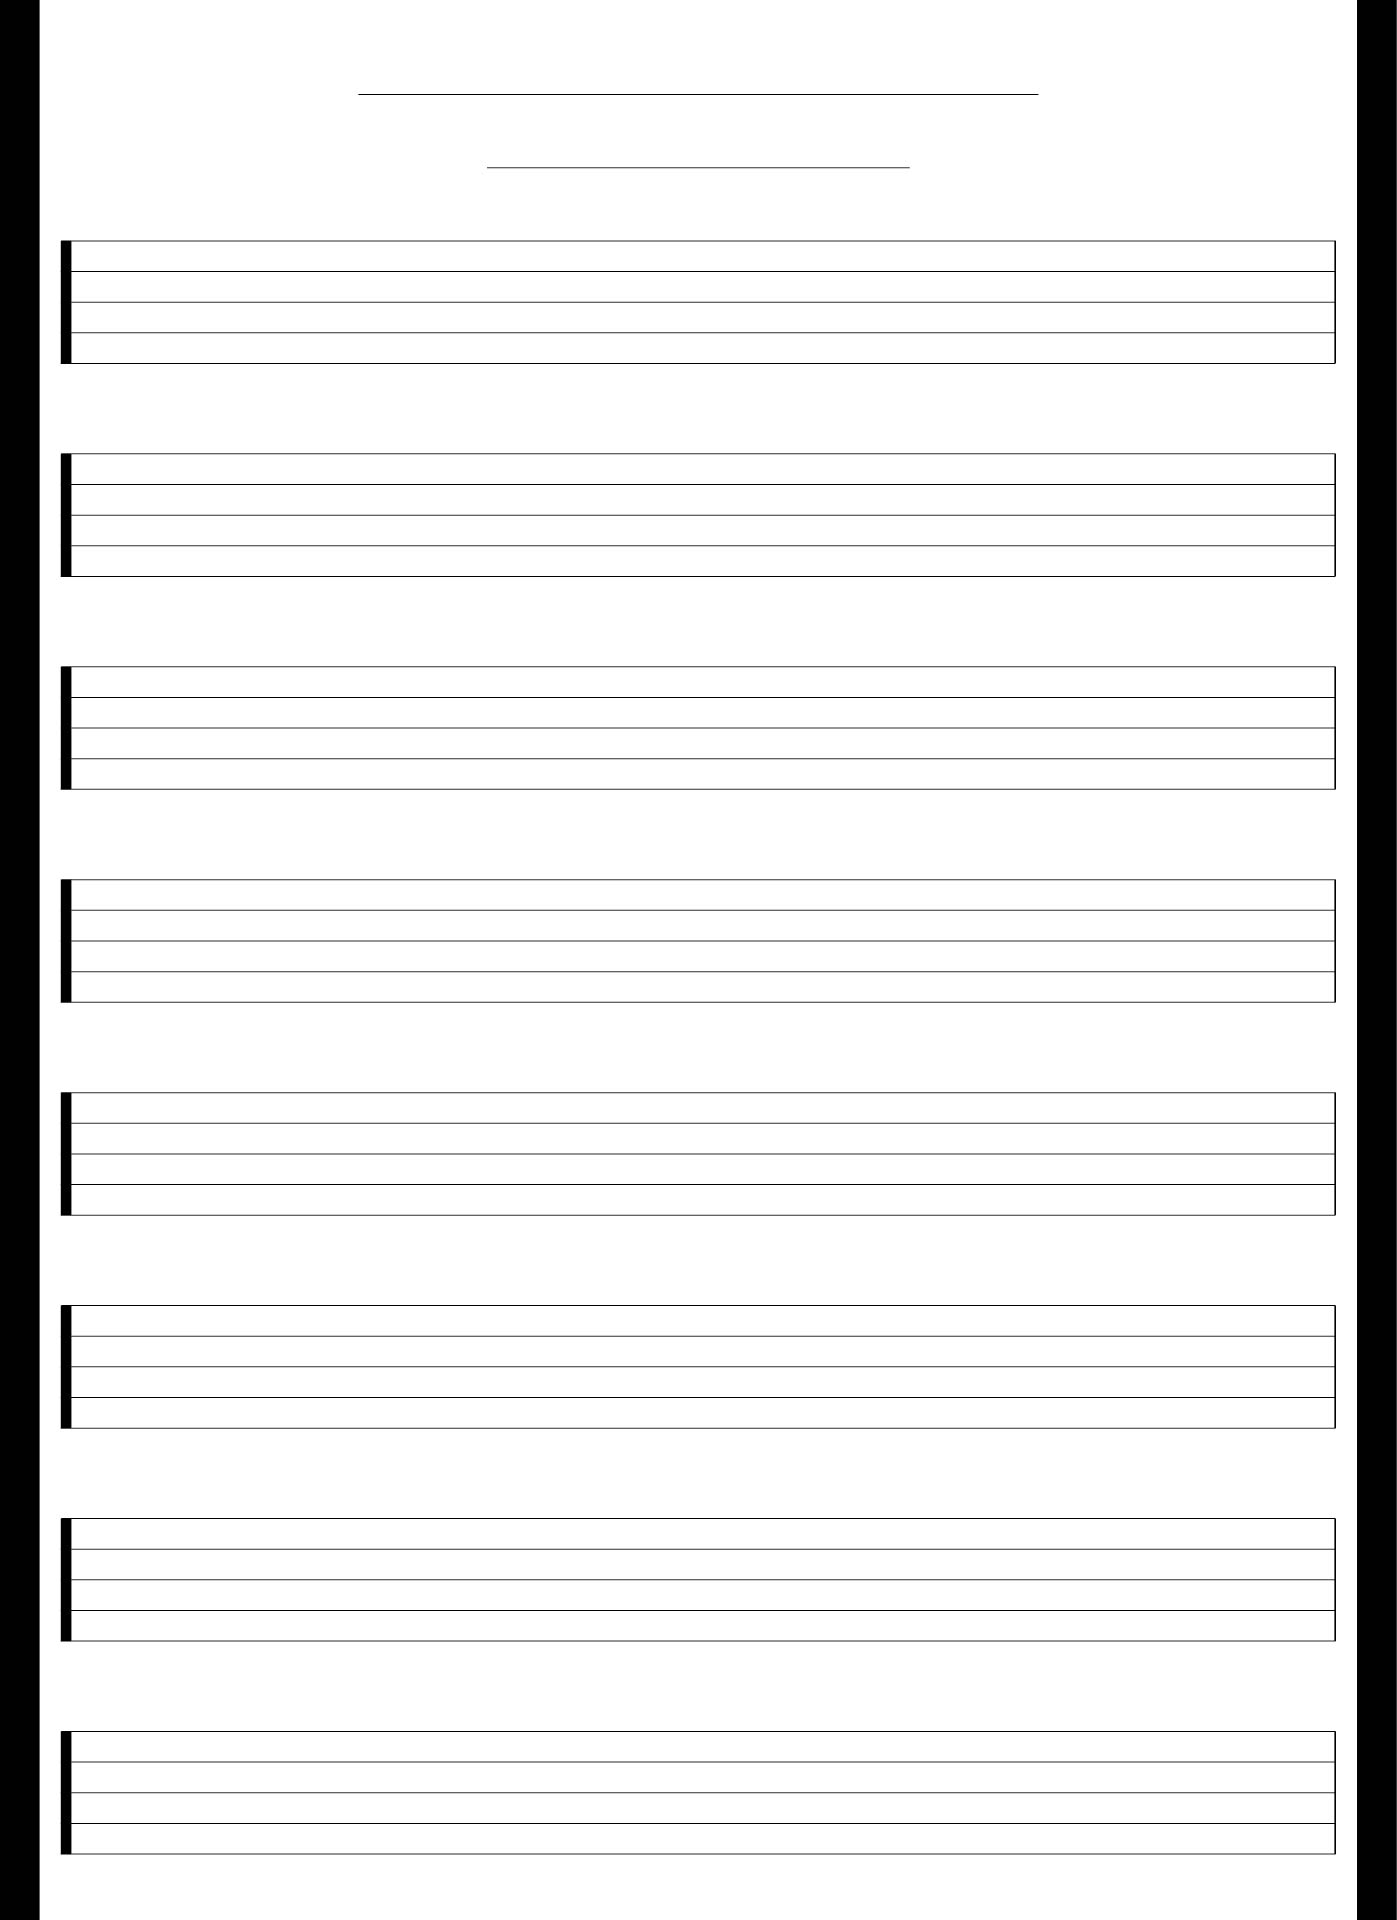 5-best-images-of-free-printable-staff-paper-blank-sheet-music-blank